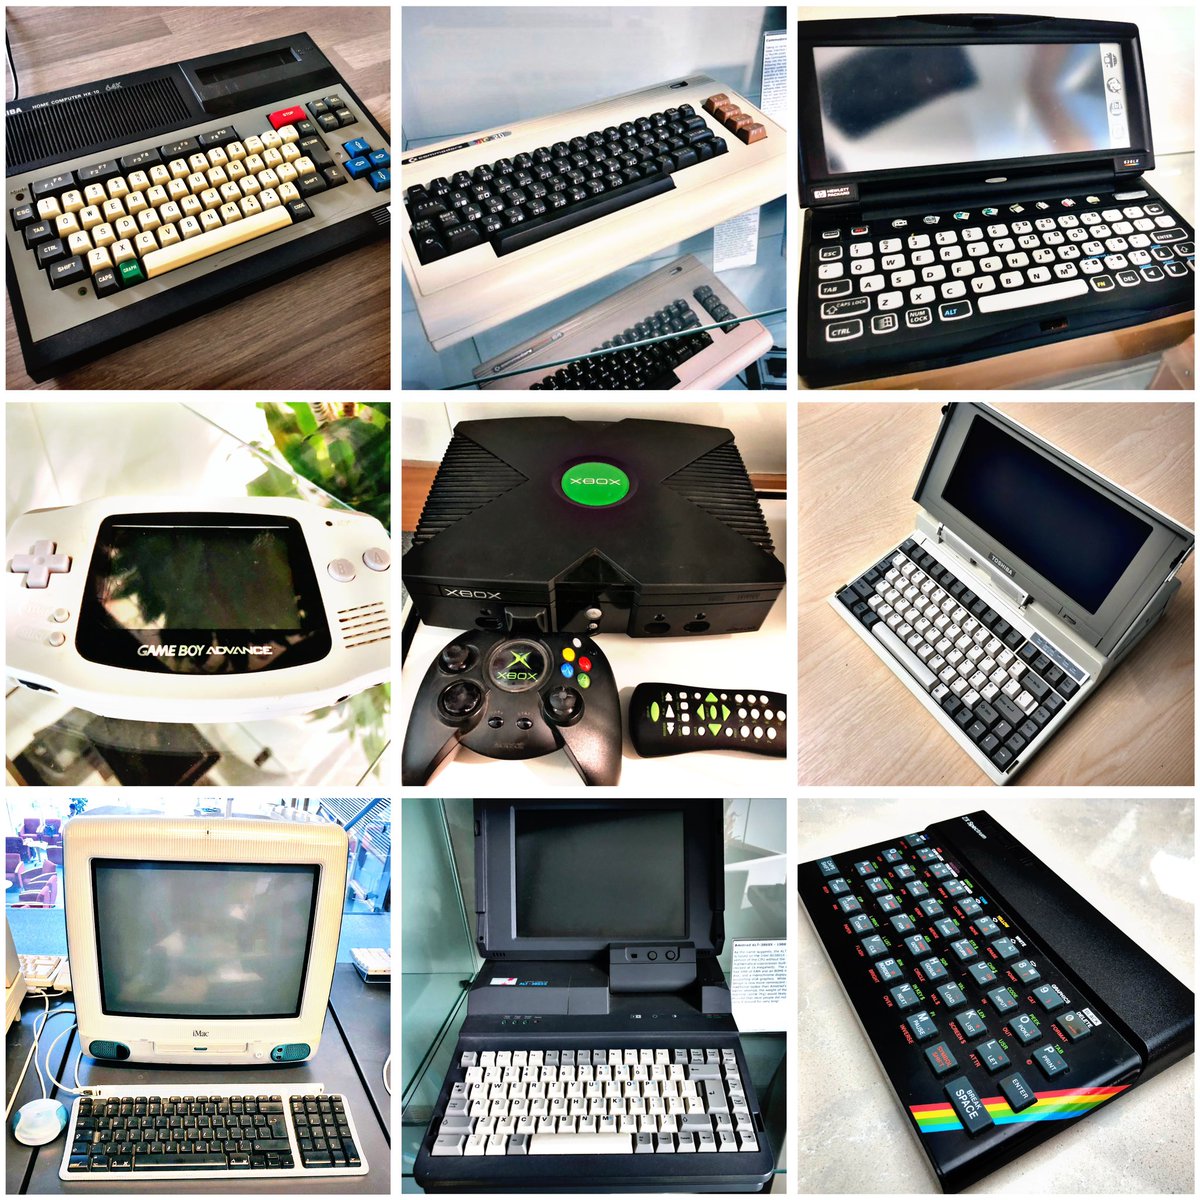 This week’s #RetroEnnead offers you the #HX10, #VIC20, #620LX, #GBA, #Xbox, #T1200, #iMac G3, #ALT386SX and #ZXSpectrum. Choose a line of 3 and lose the rest! #RetroComputing #ComputerHistory #RetroGaming #VideoGames